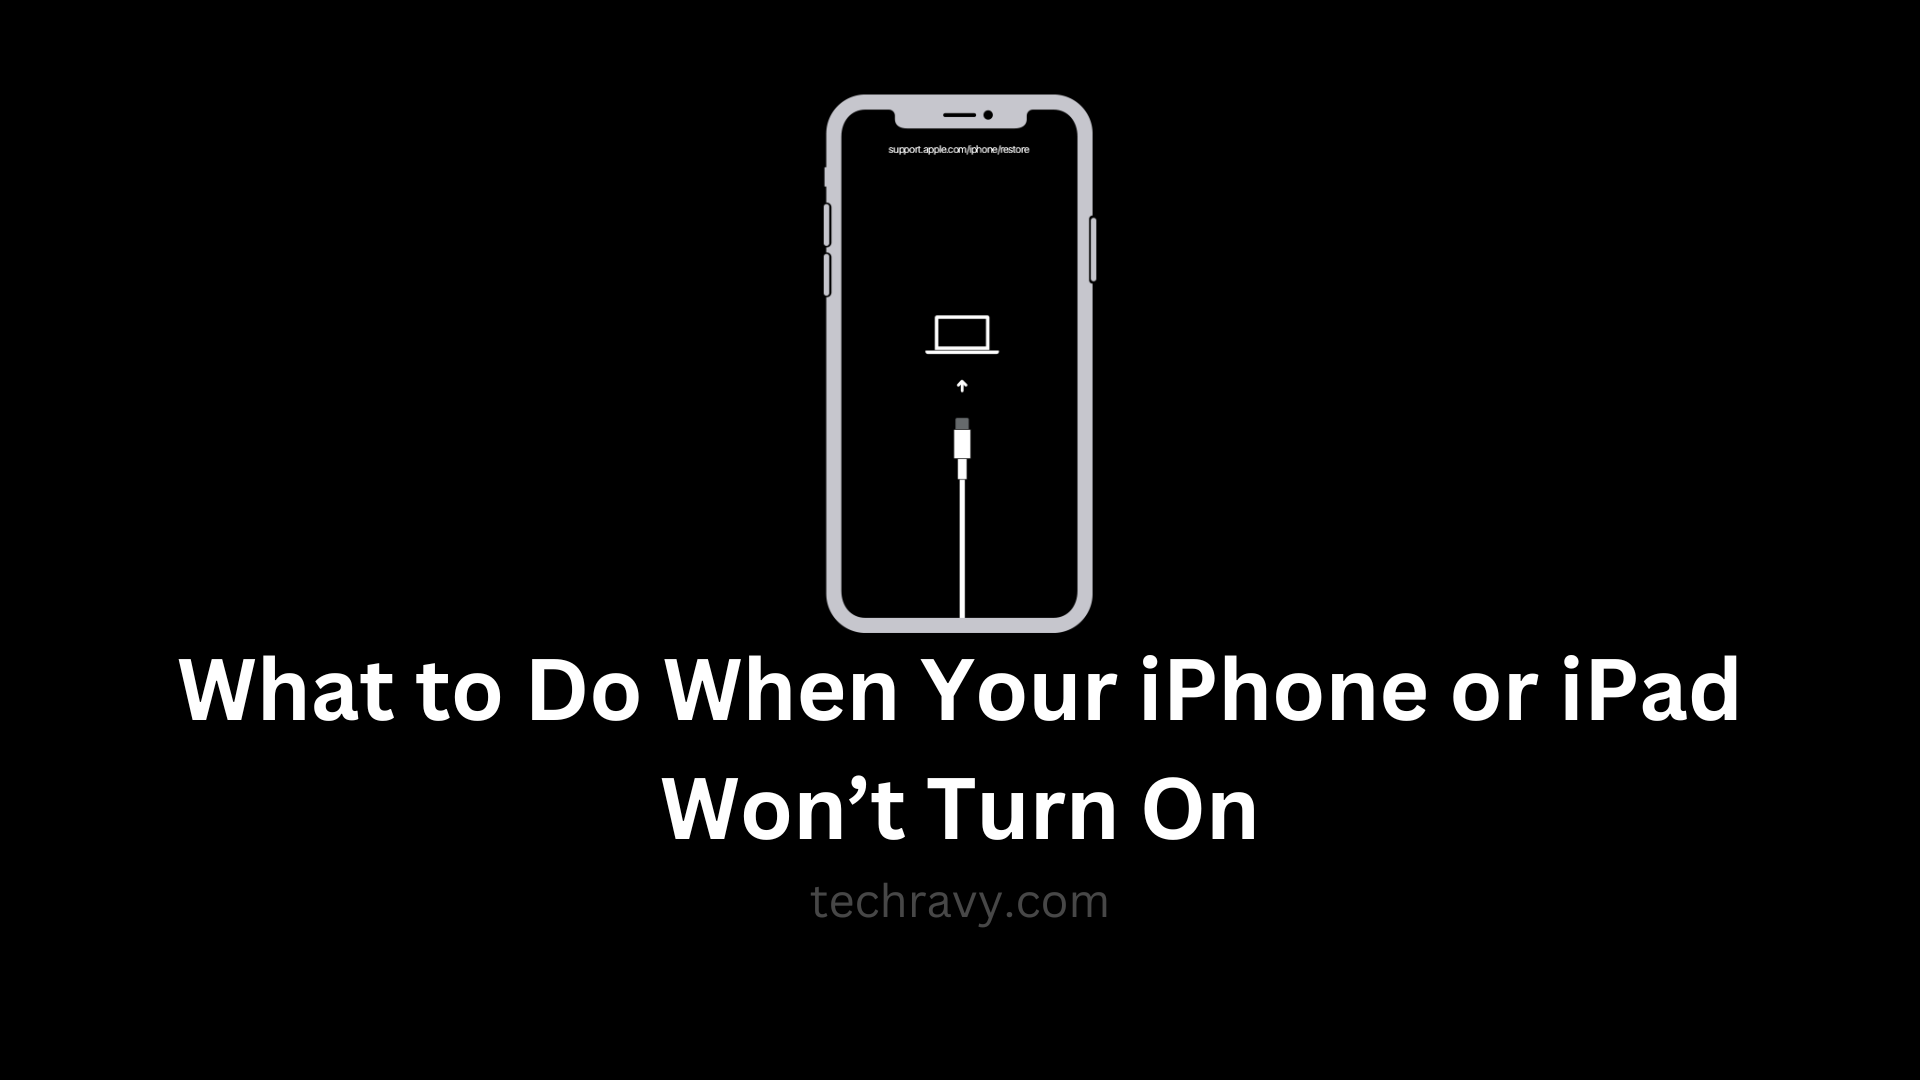 What to Do When Your iPhone or iPad Won’t Turn On